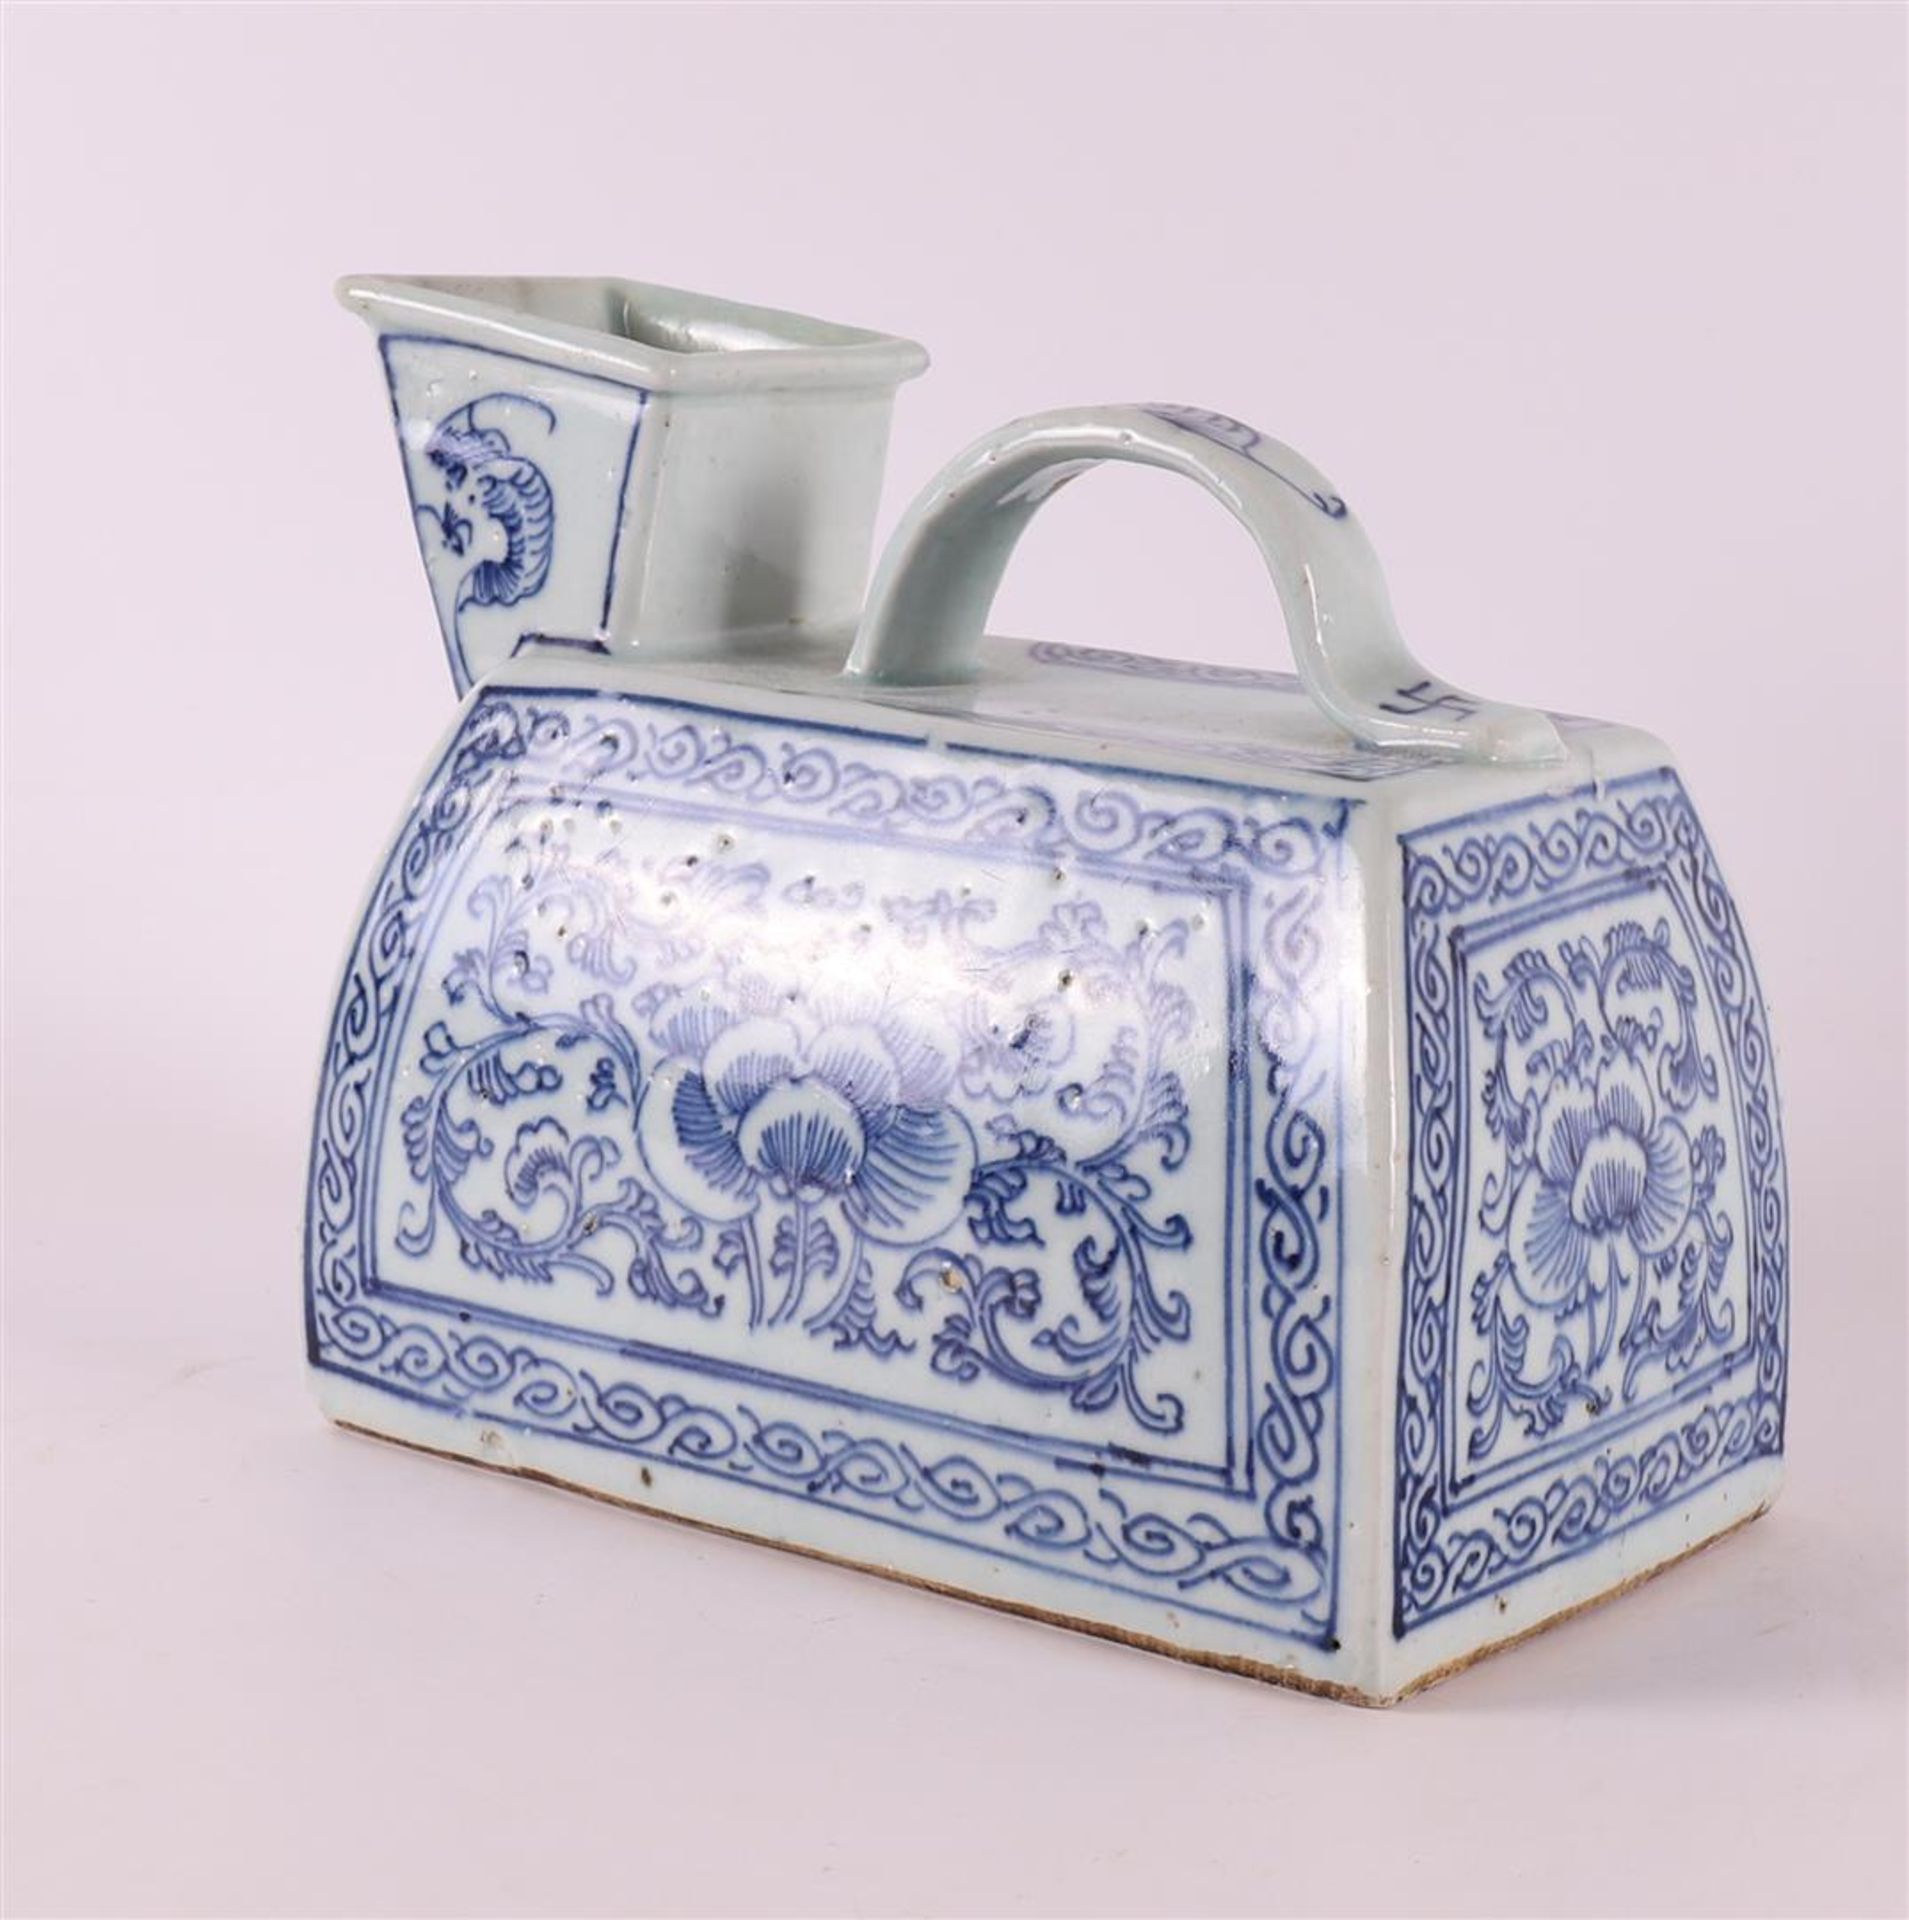 A blue and white porcelain urinal, China, 19th century. - Image 2 of 5